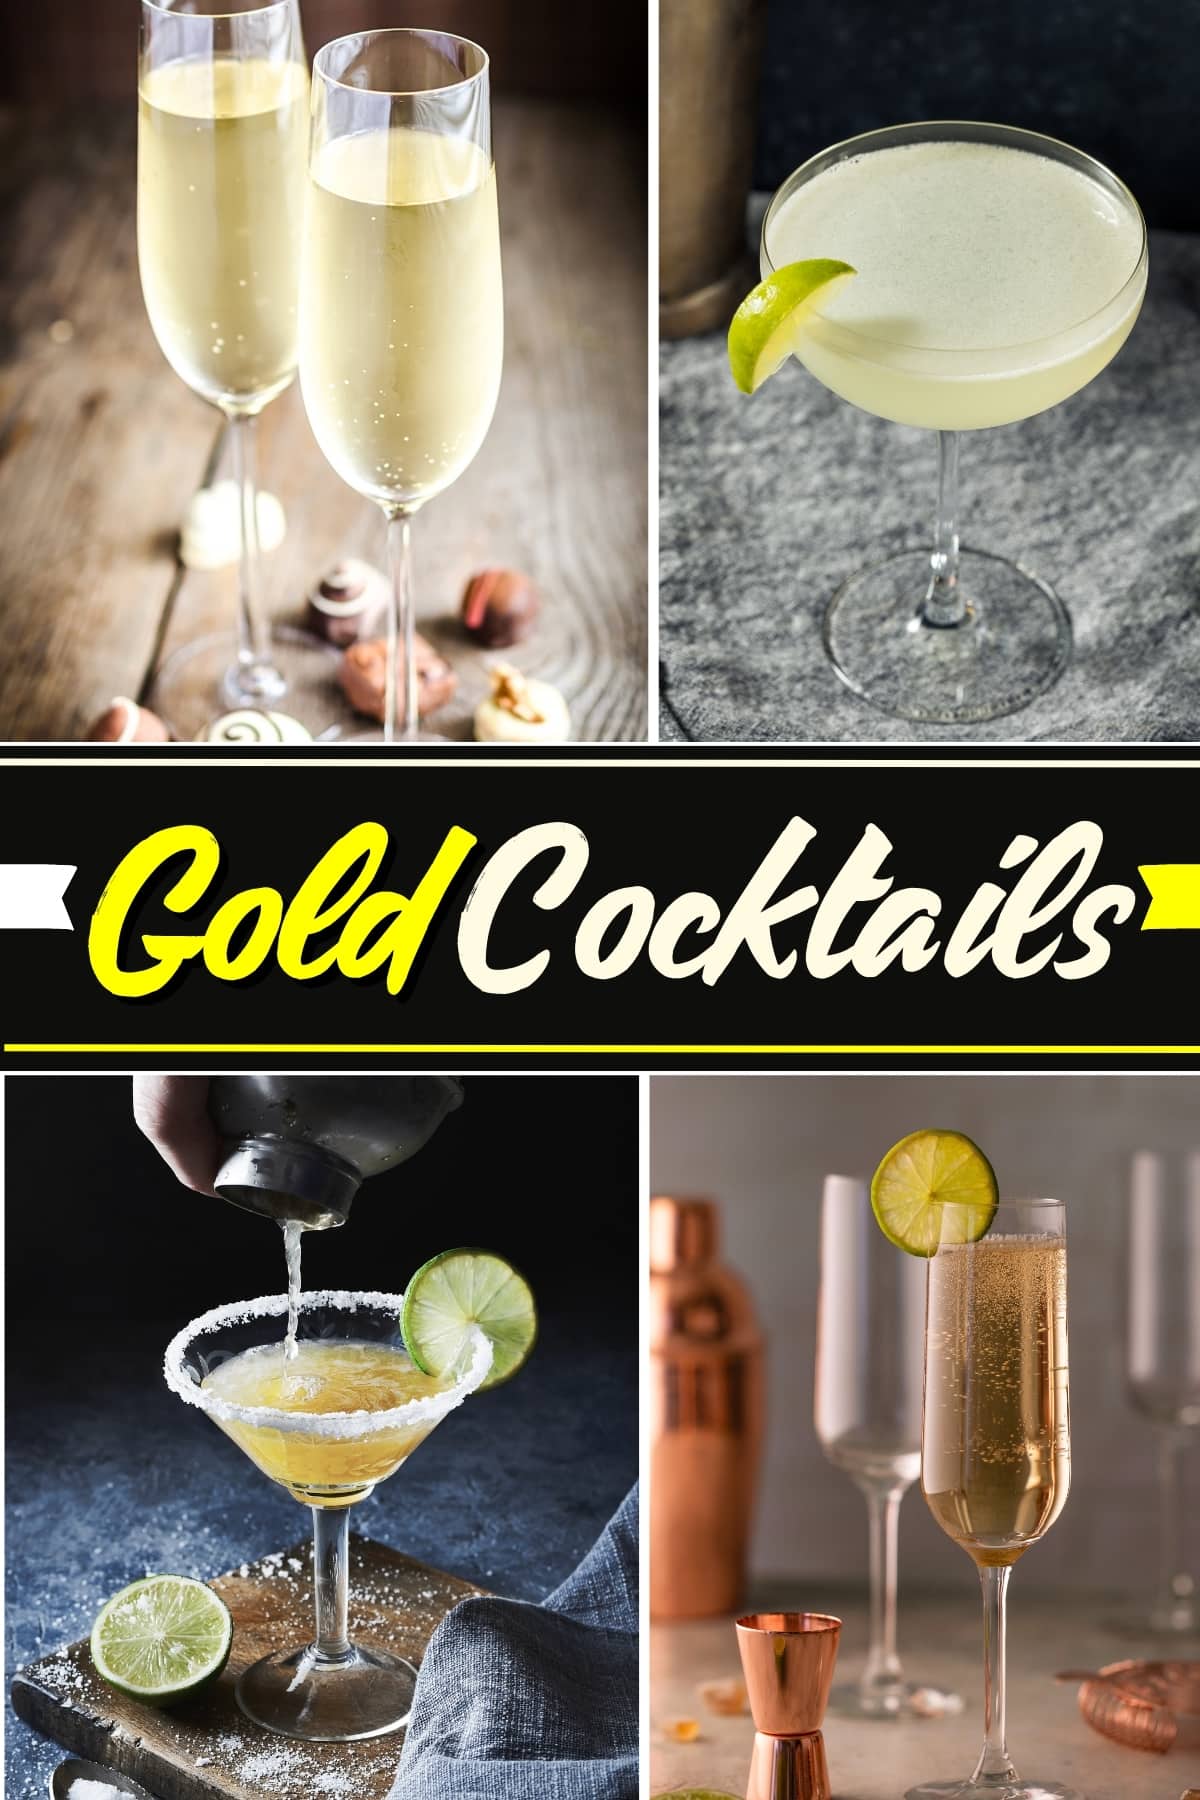 13 Shimmering Gold Cocktails to Dazzle Your Guests